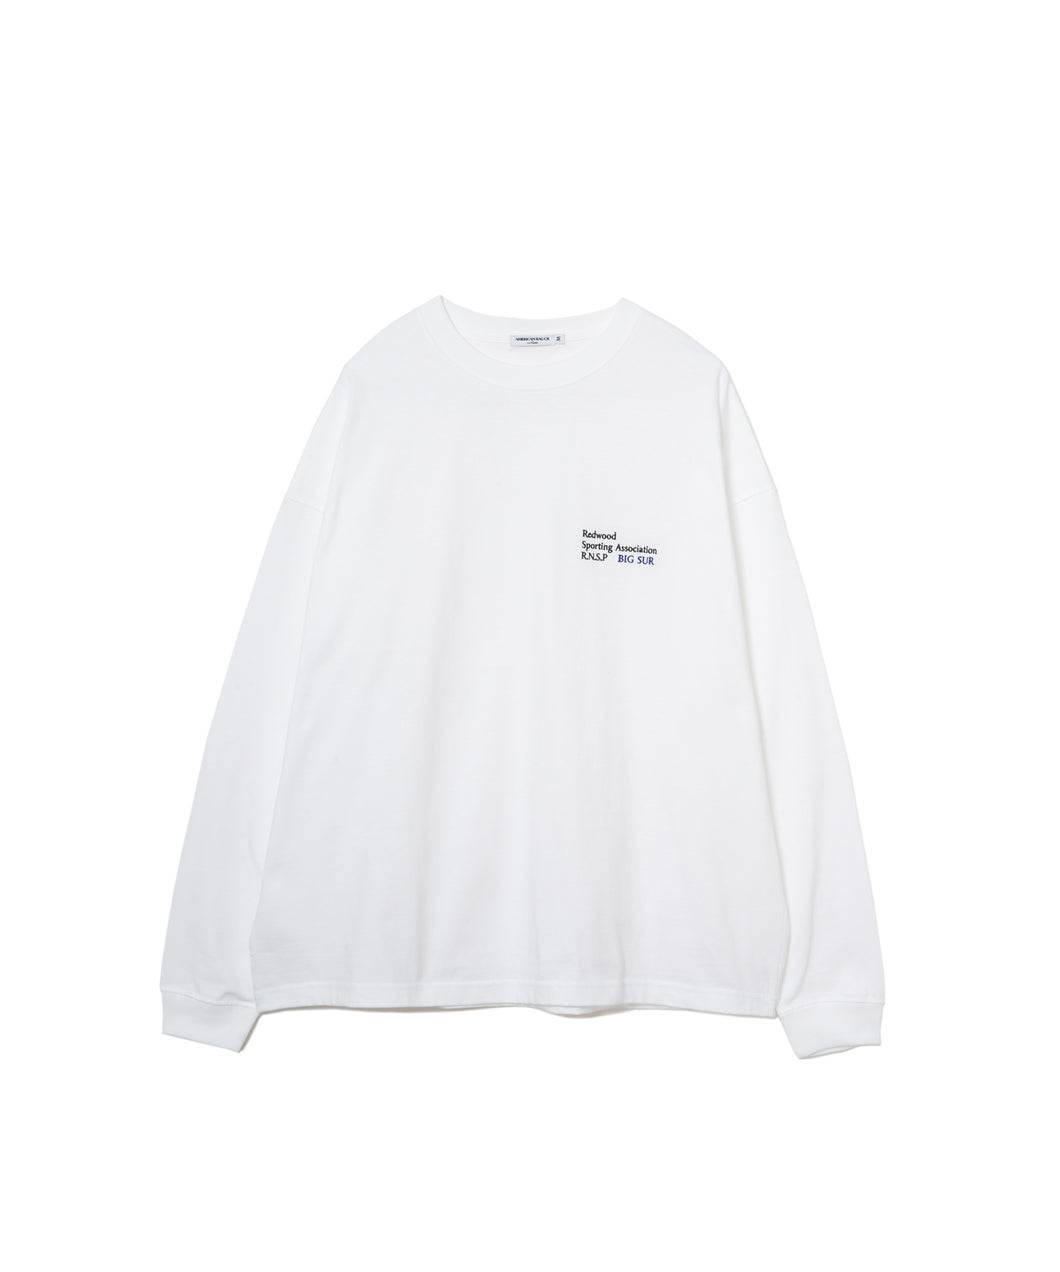 【MEN】EMBROIDERY LOGO L/S TEE